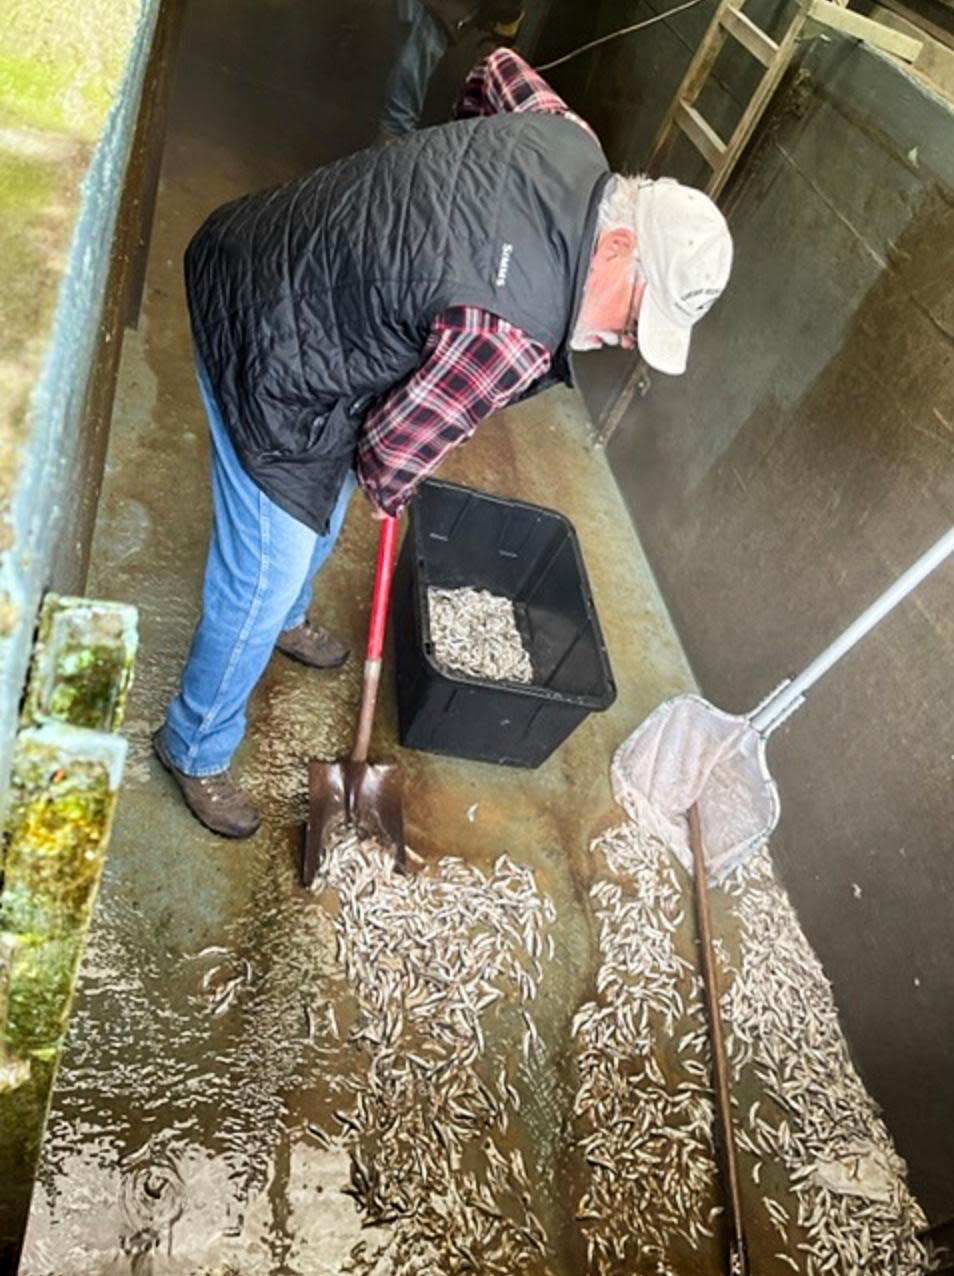 <span>Tim Hooper, hatchery manager, shovels dead pre-smolts from the bottom of a rearing pond.</span><span>Photograph: Oregon department of fish and wildlife</span>